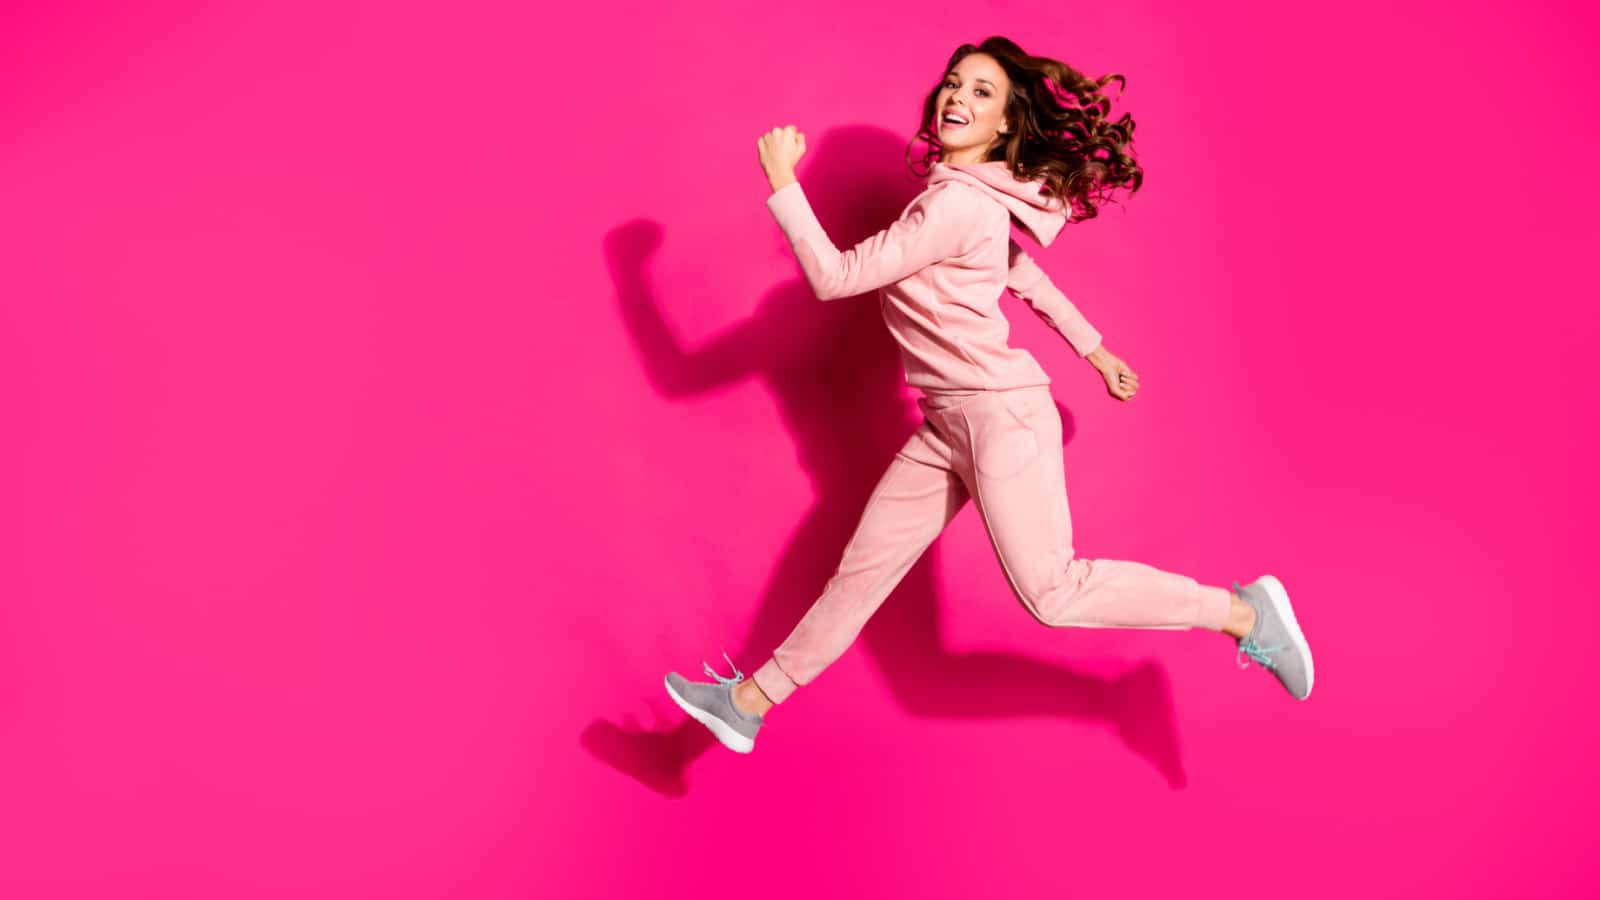 Full length body size photo jump high amazing party lady hands arms fists raised great flexibility wearing casual pink costume suit pullover outfit isolated bright vibrant rose background